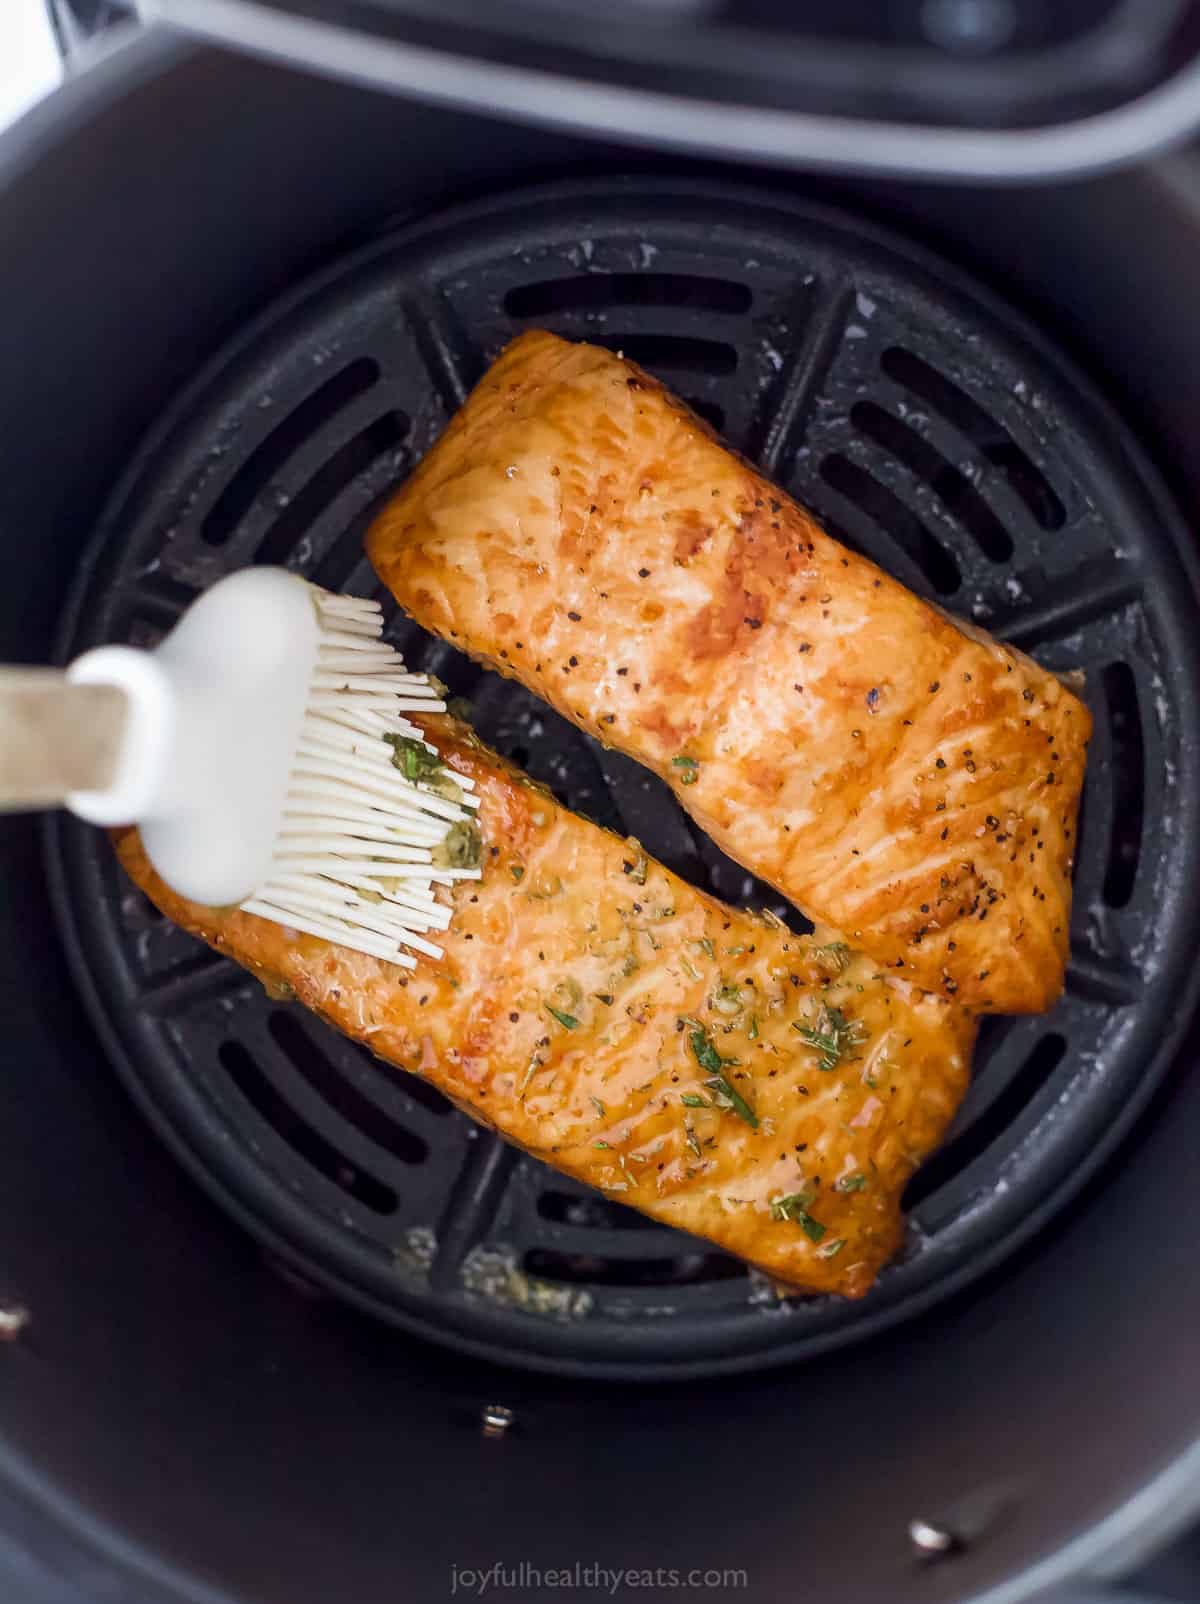 Two filets of salmon brushed with honey garlic sauce.